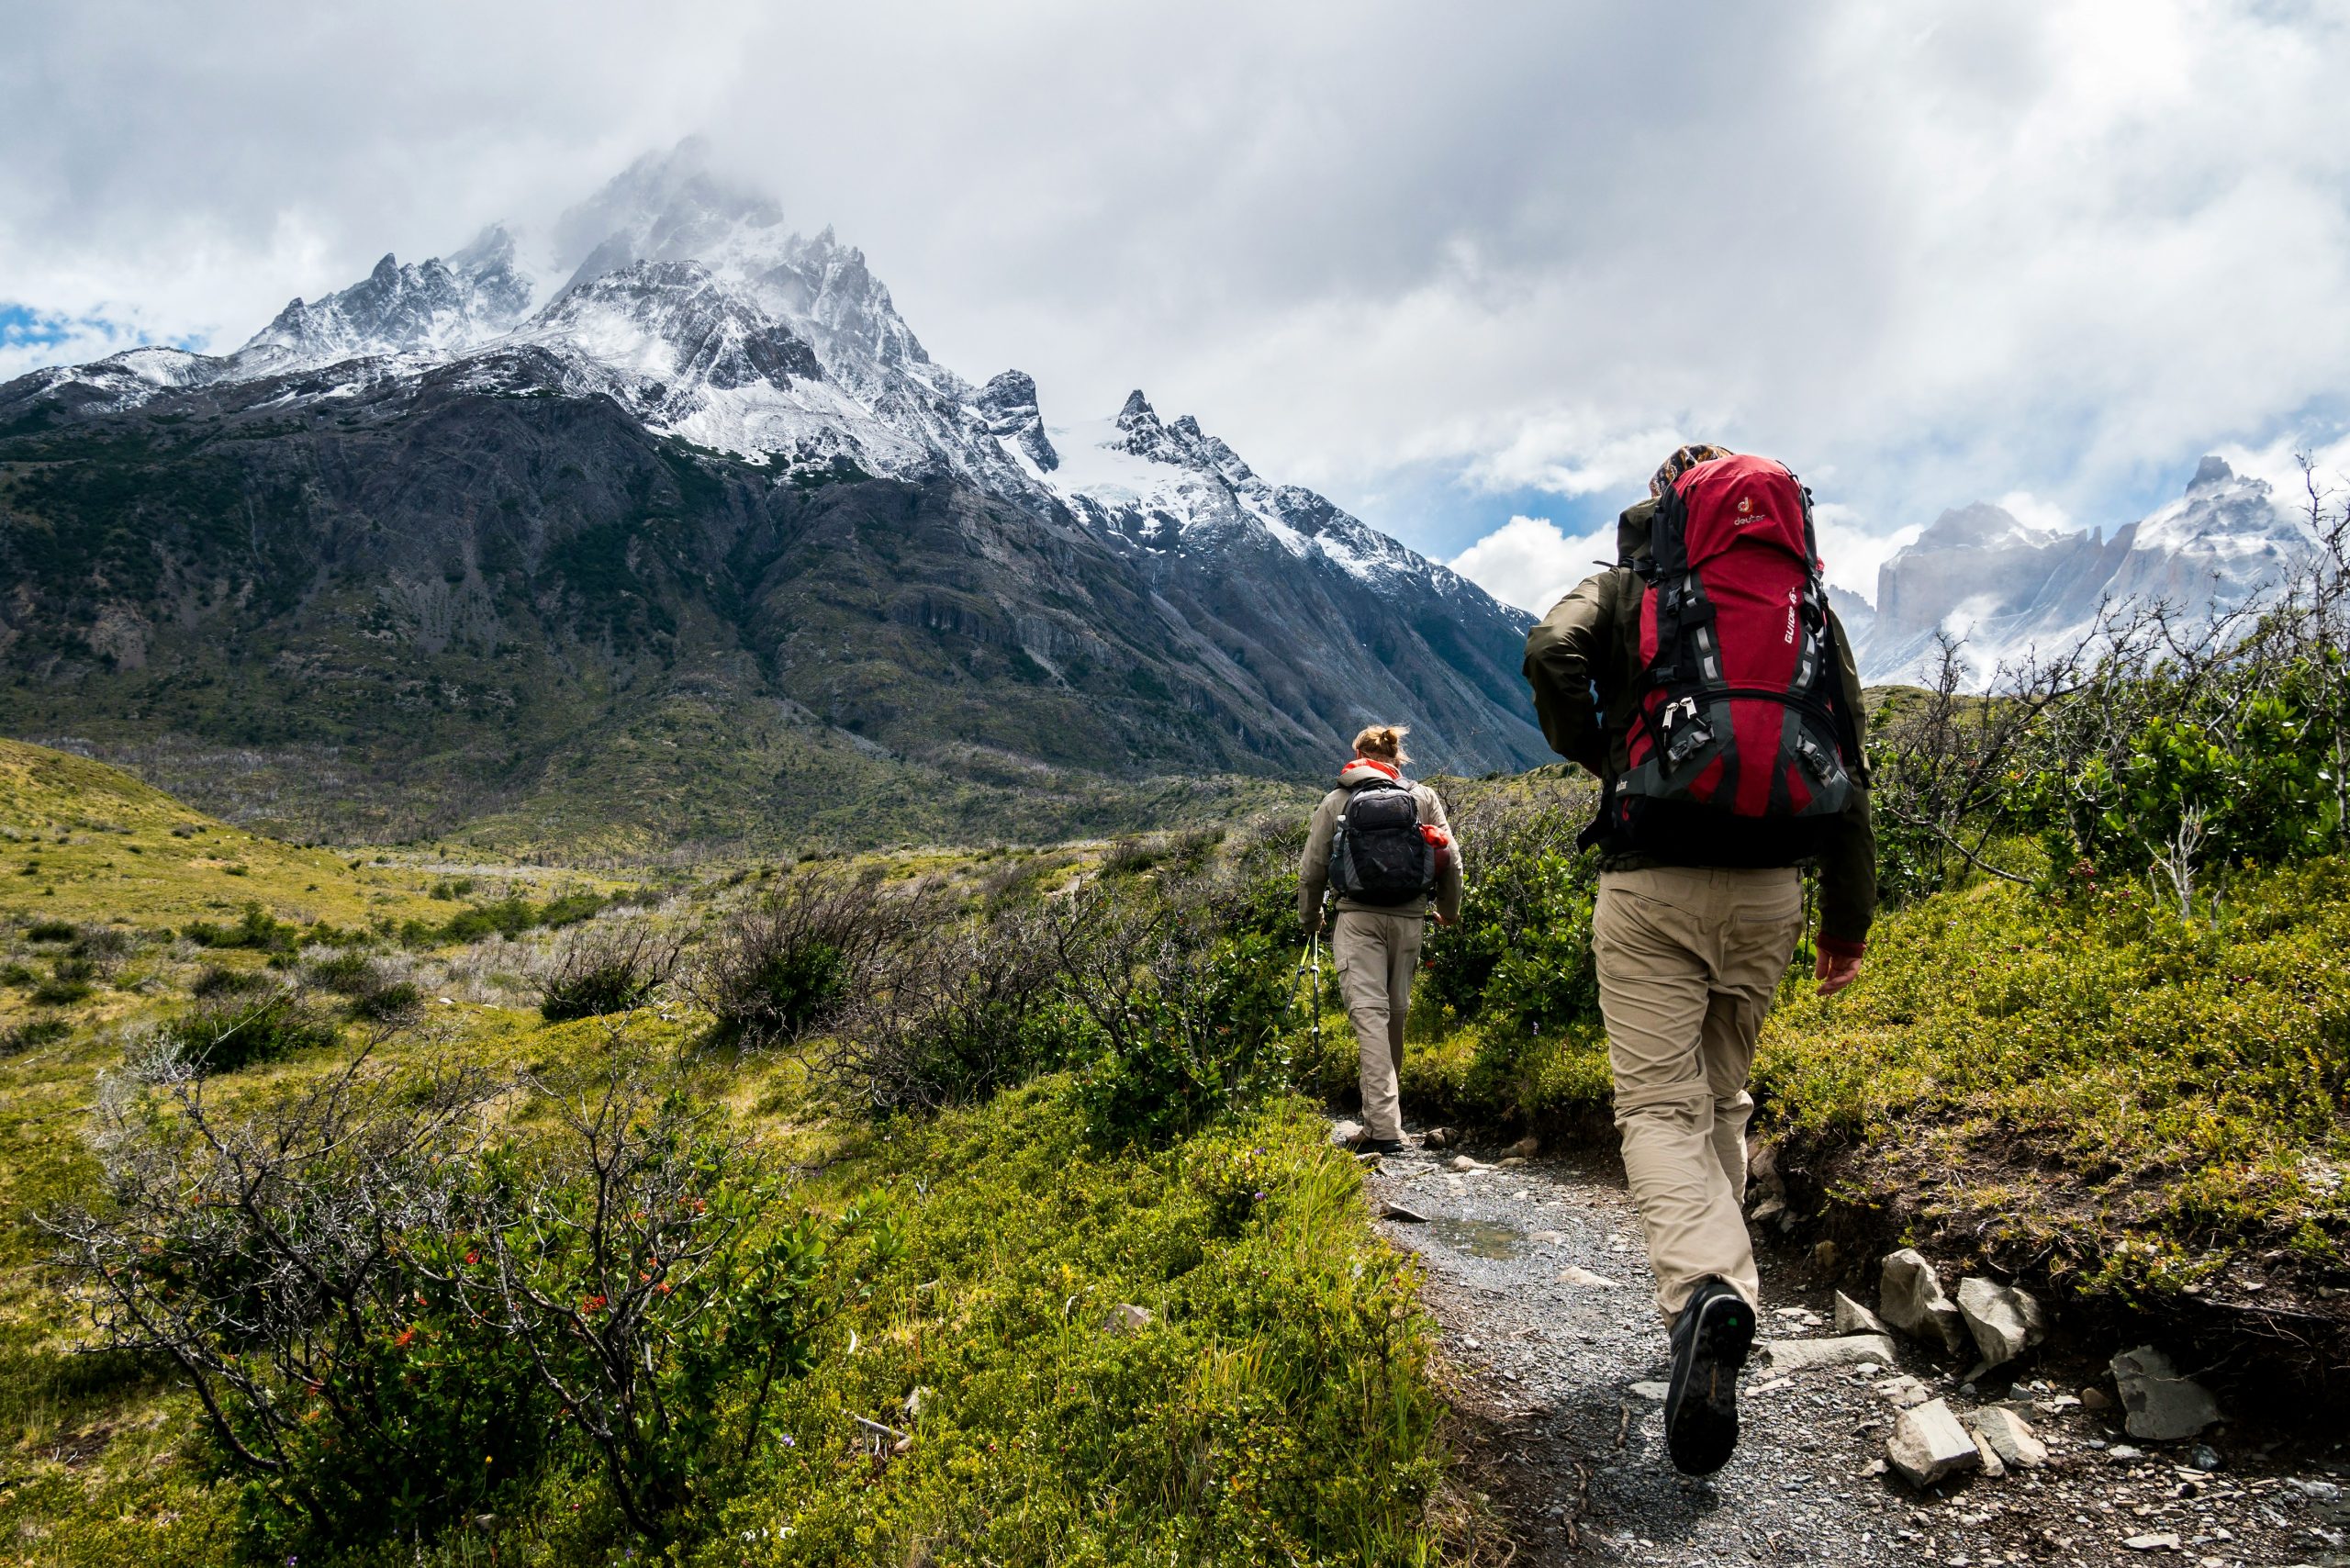 explore the great outdoors with our exhilarating trekking experiences. embark on an adventure and discover stunning natural landscapes, rugged terrain, and breathtaking vistas.